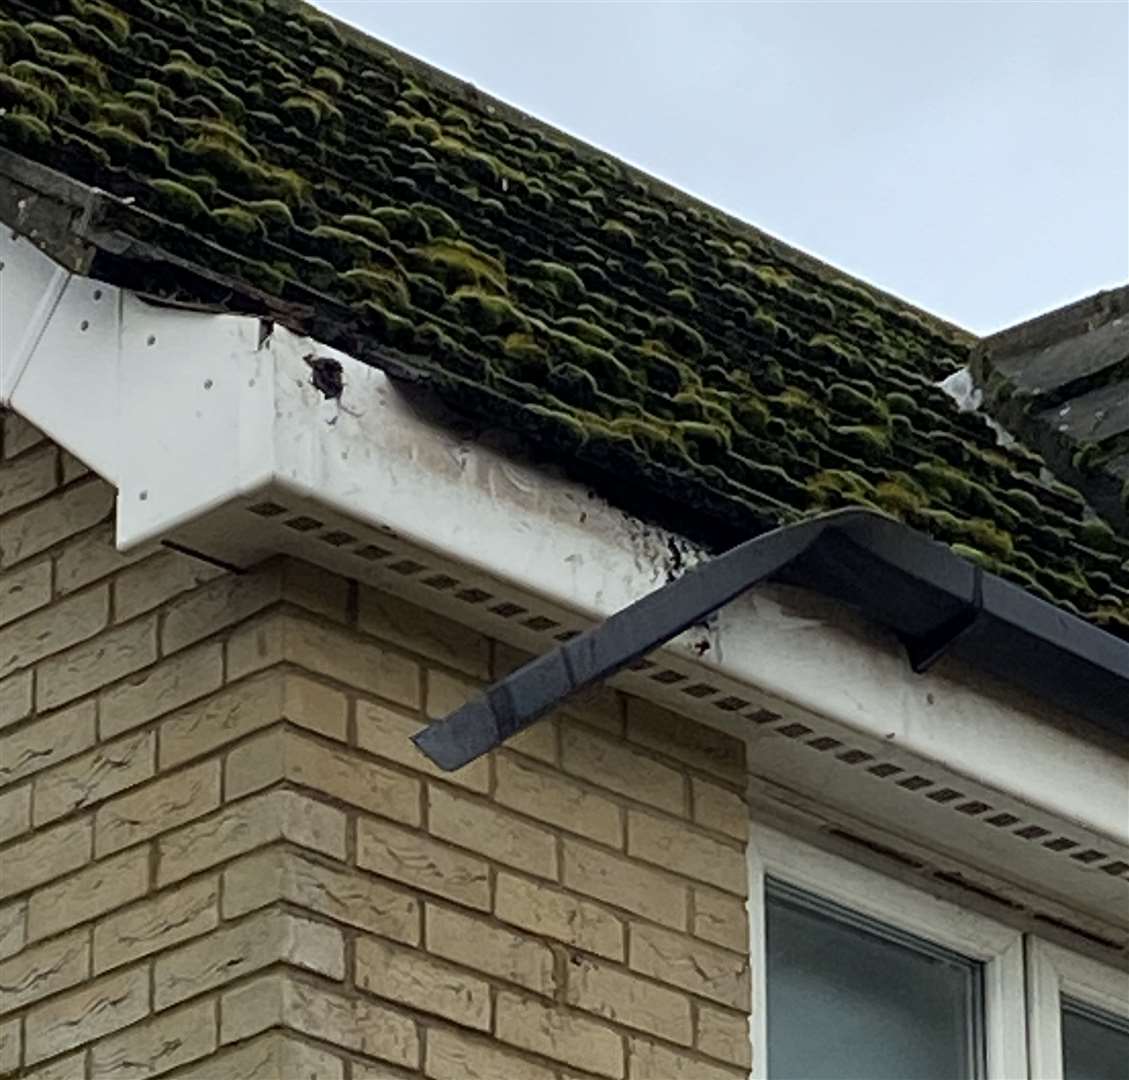 A house opposite the tree sustained damage to its roof. Photo: Stella Twomey